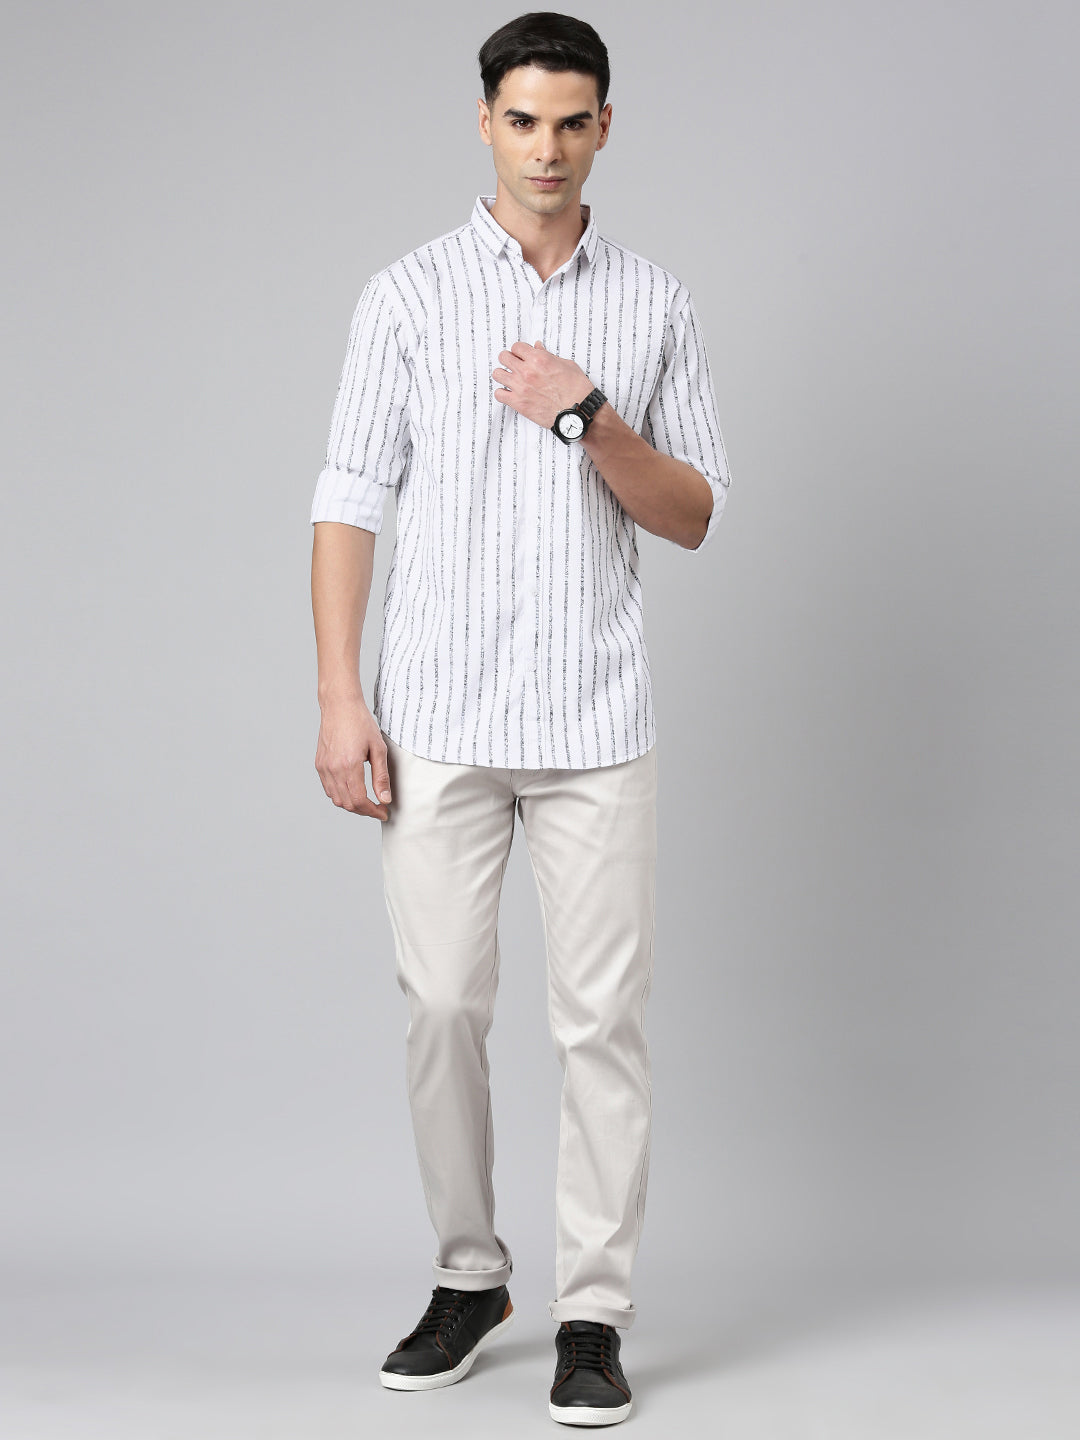 Majestic Man Casual Comfortable Slim Fit Stripped Cotton Shirt - White